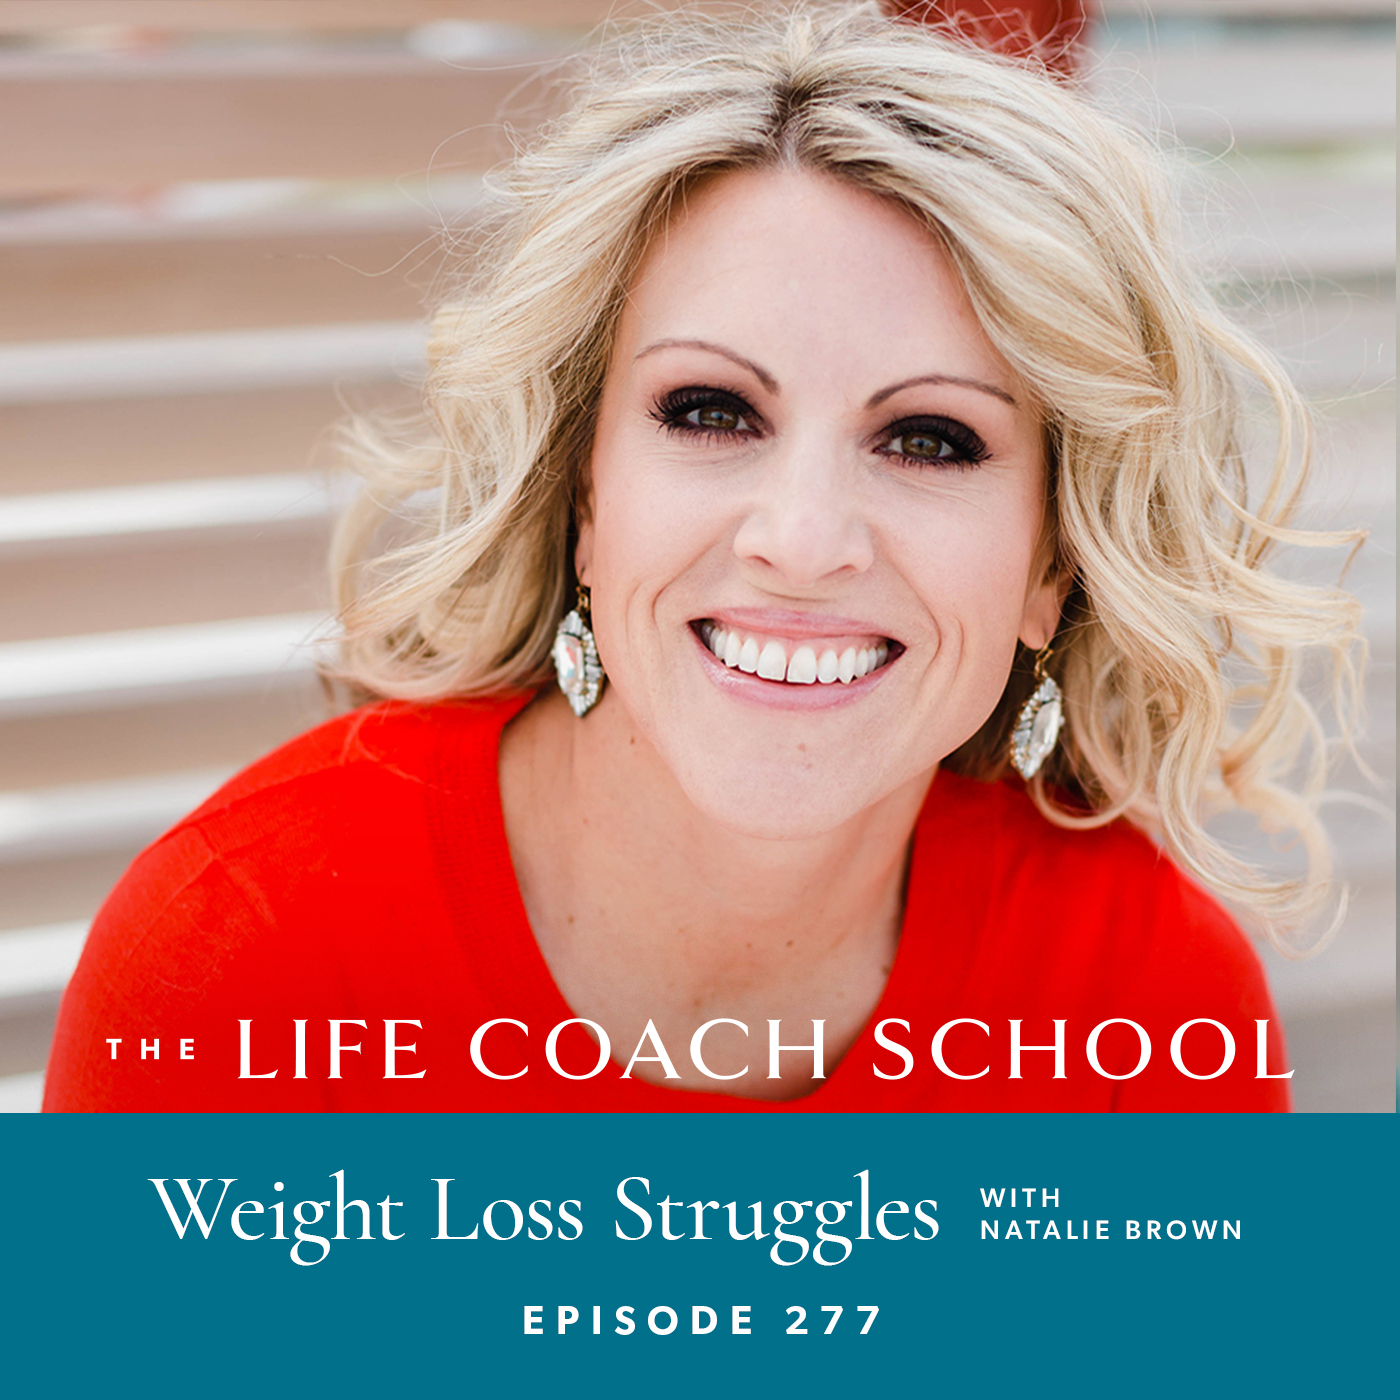 The Life Coach School Podcast with Brooke Castillo | Episode 277 | Weight Loss Struggles with Natalie Brown